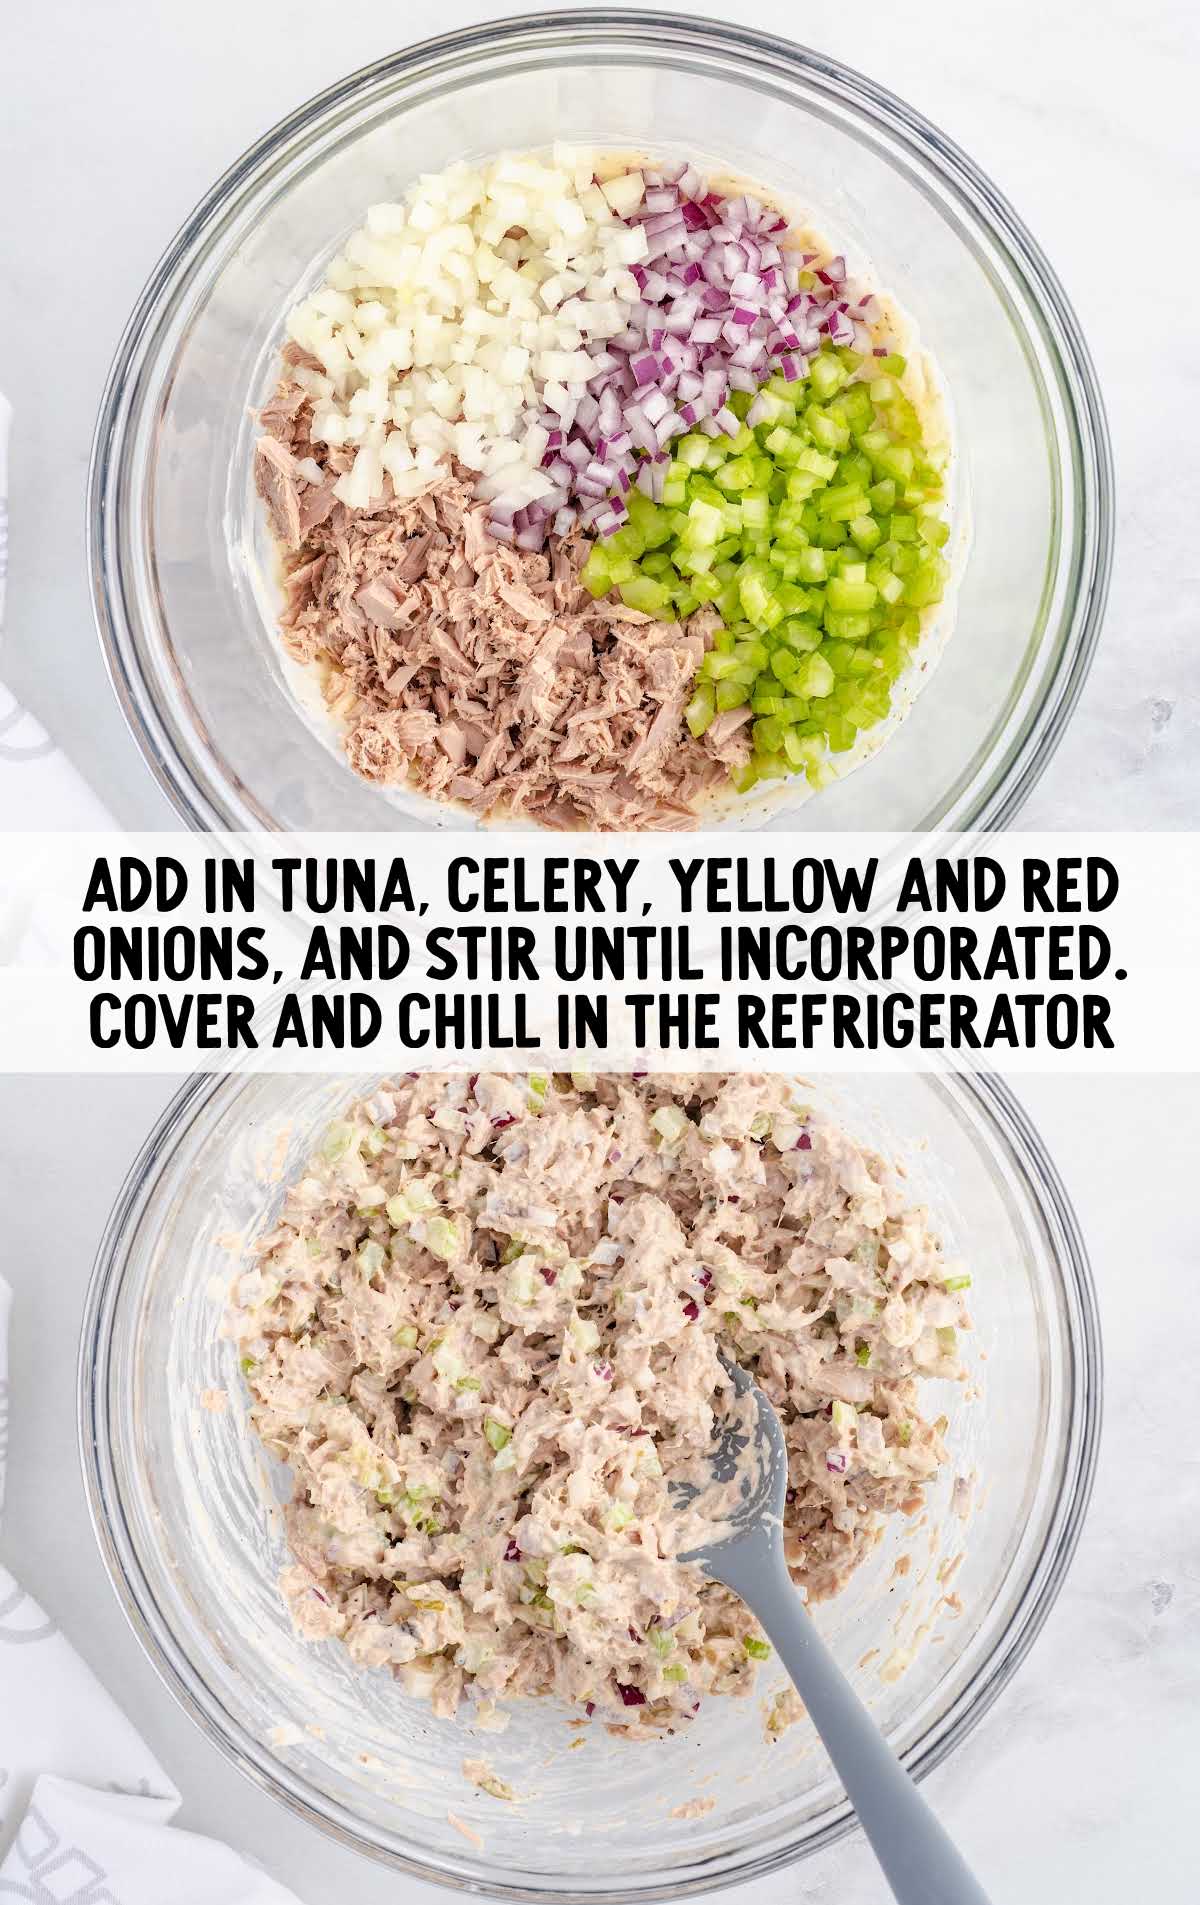 tuna, celery, yellow and red onions stir in a bowl